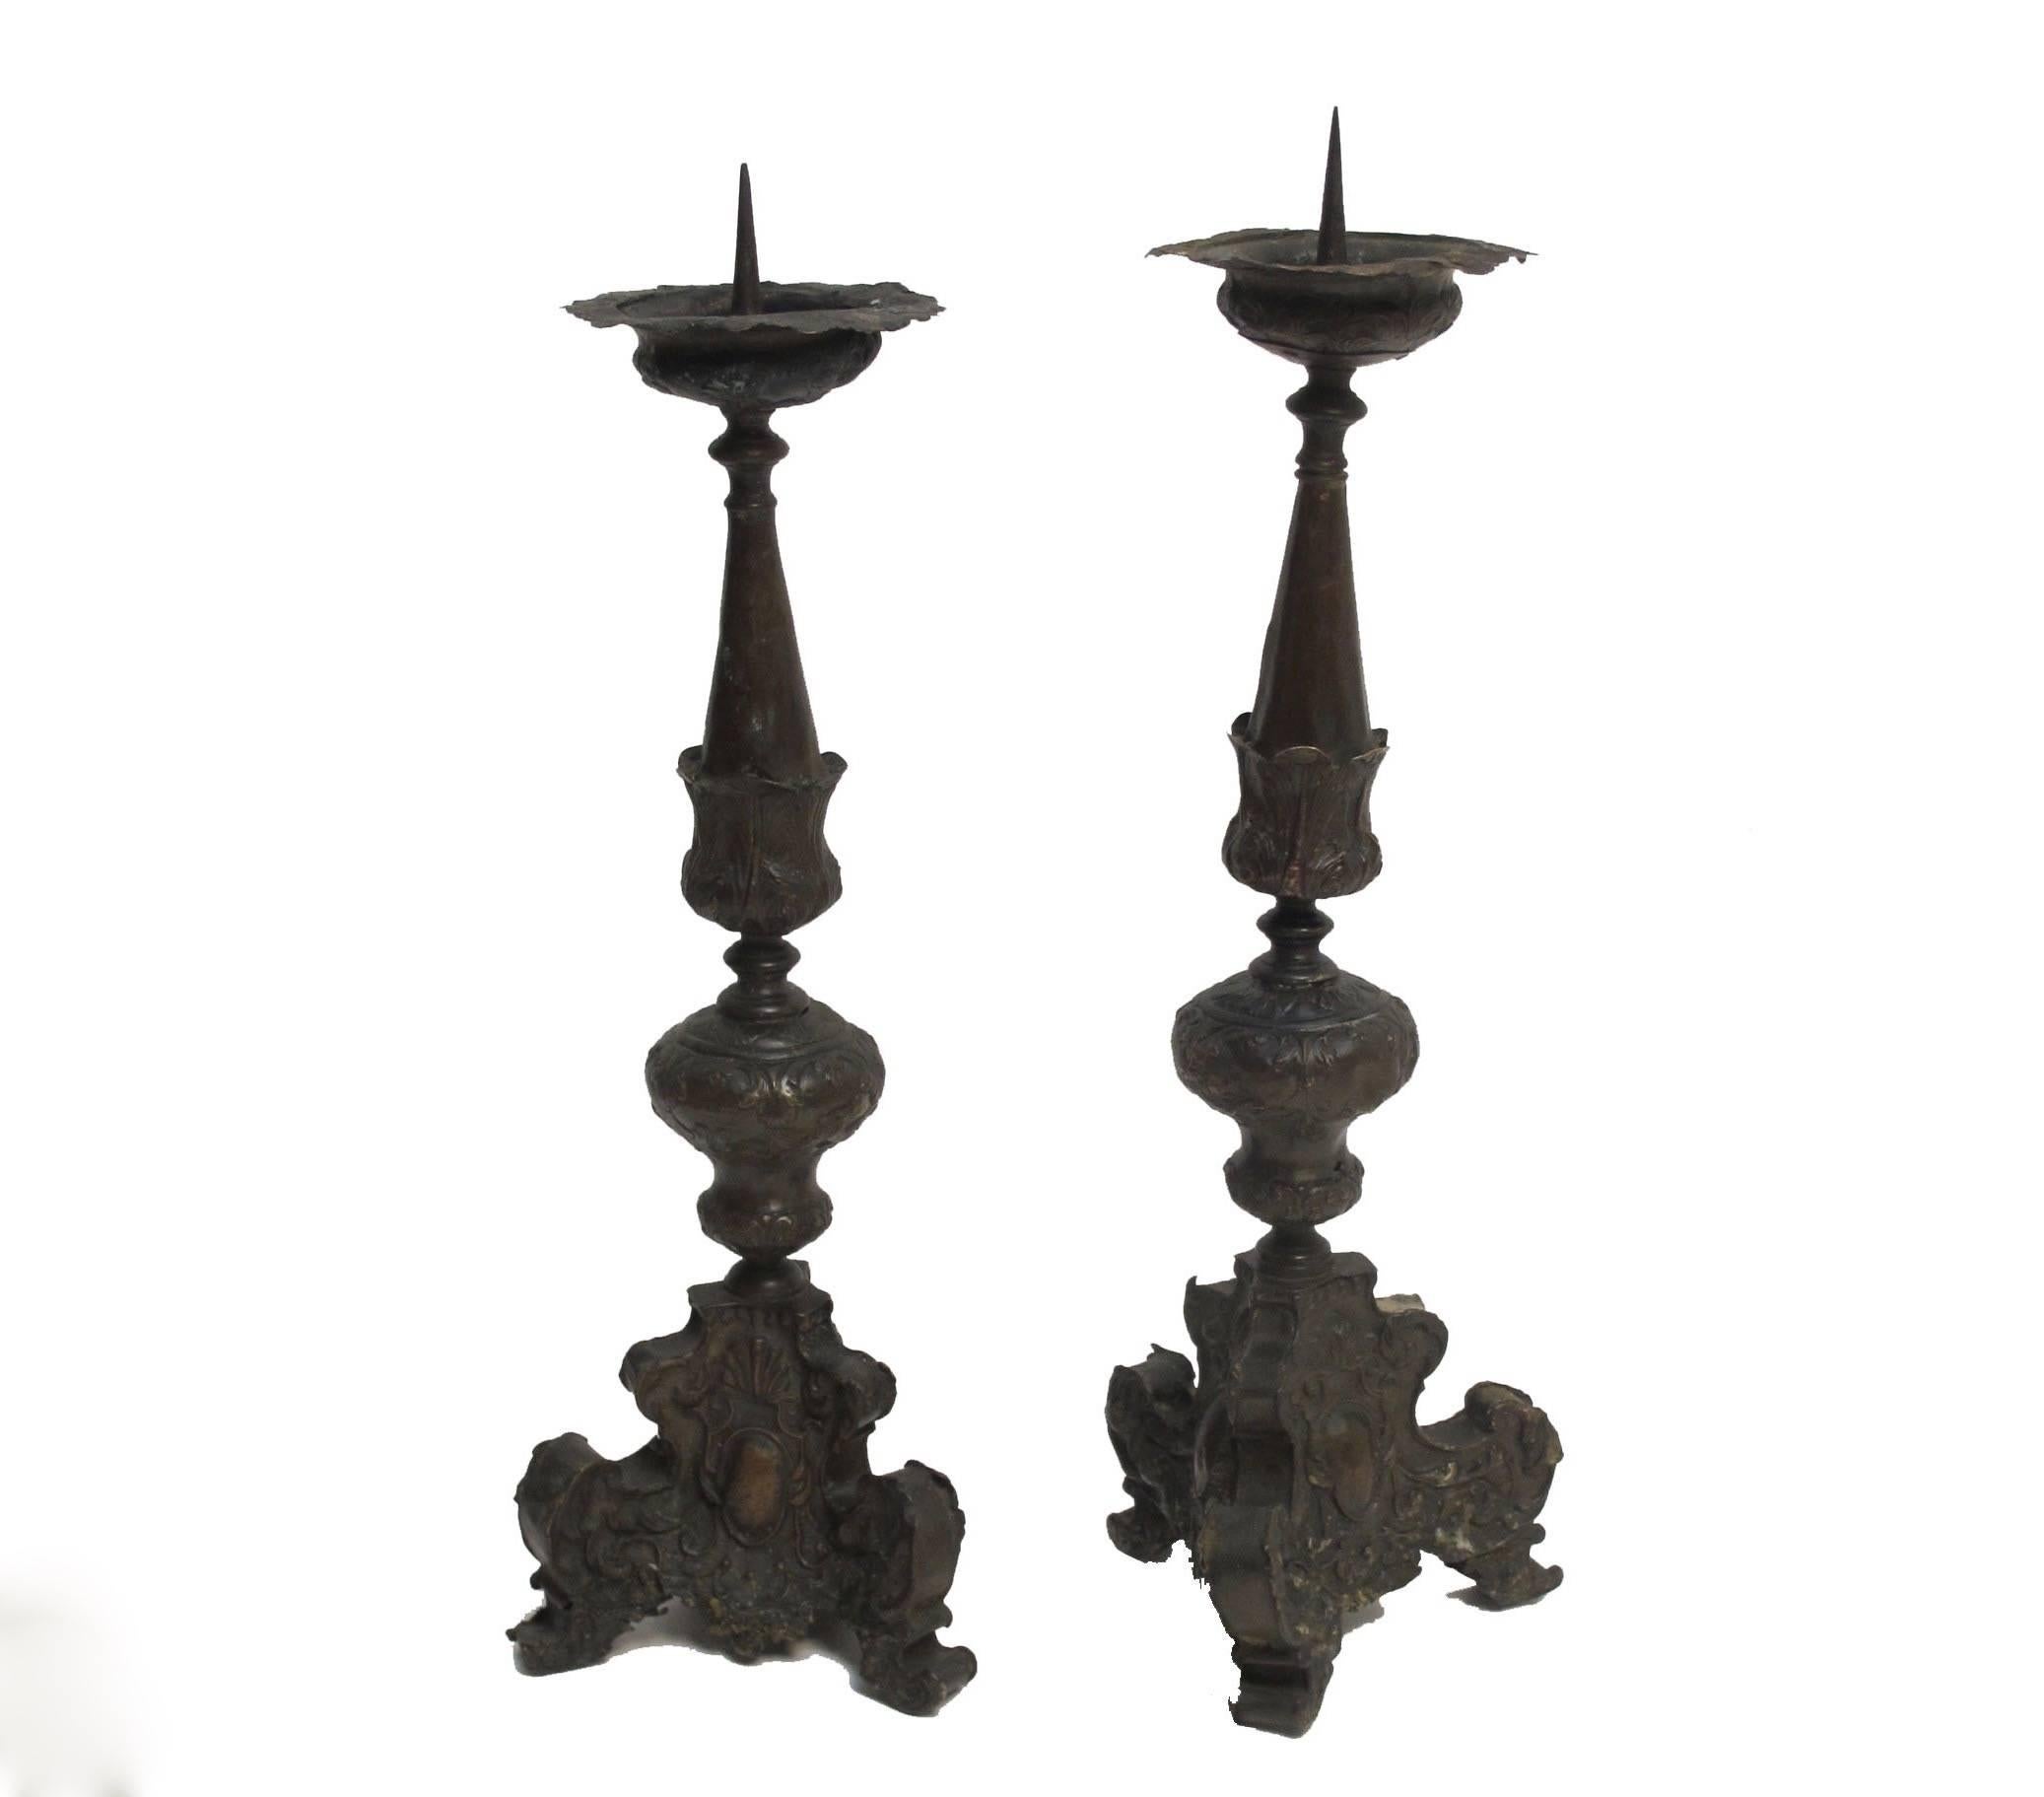 A pair of handmade copper pricket candle holders with fine embossed detailing of leaves, cartouches, sitting on scrolled feet, Italian, 17th century.